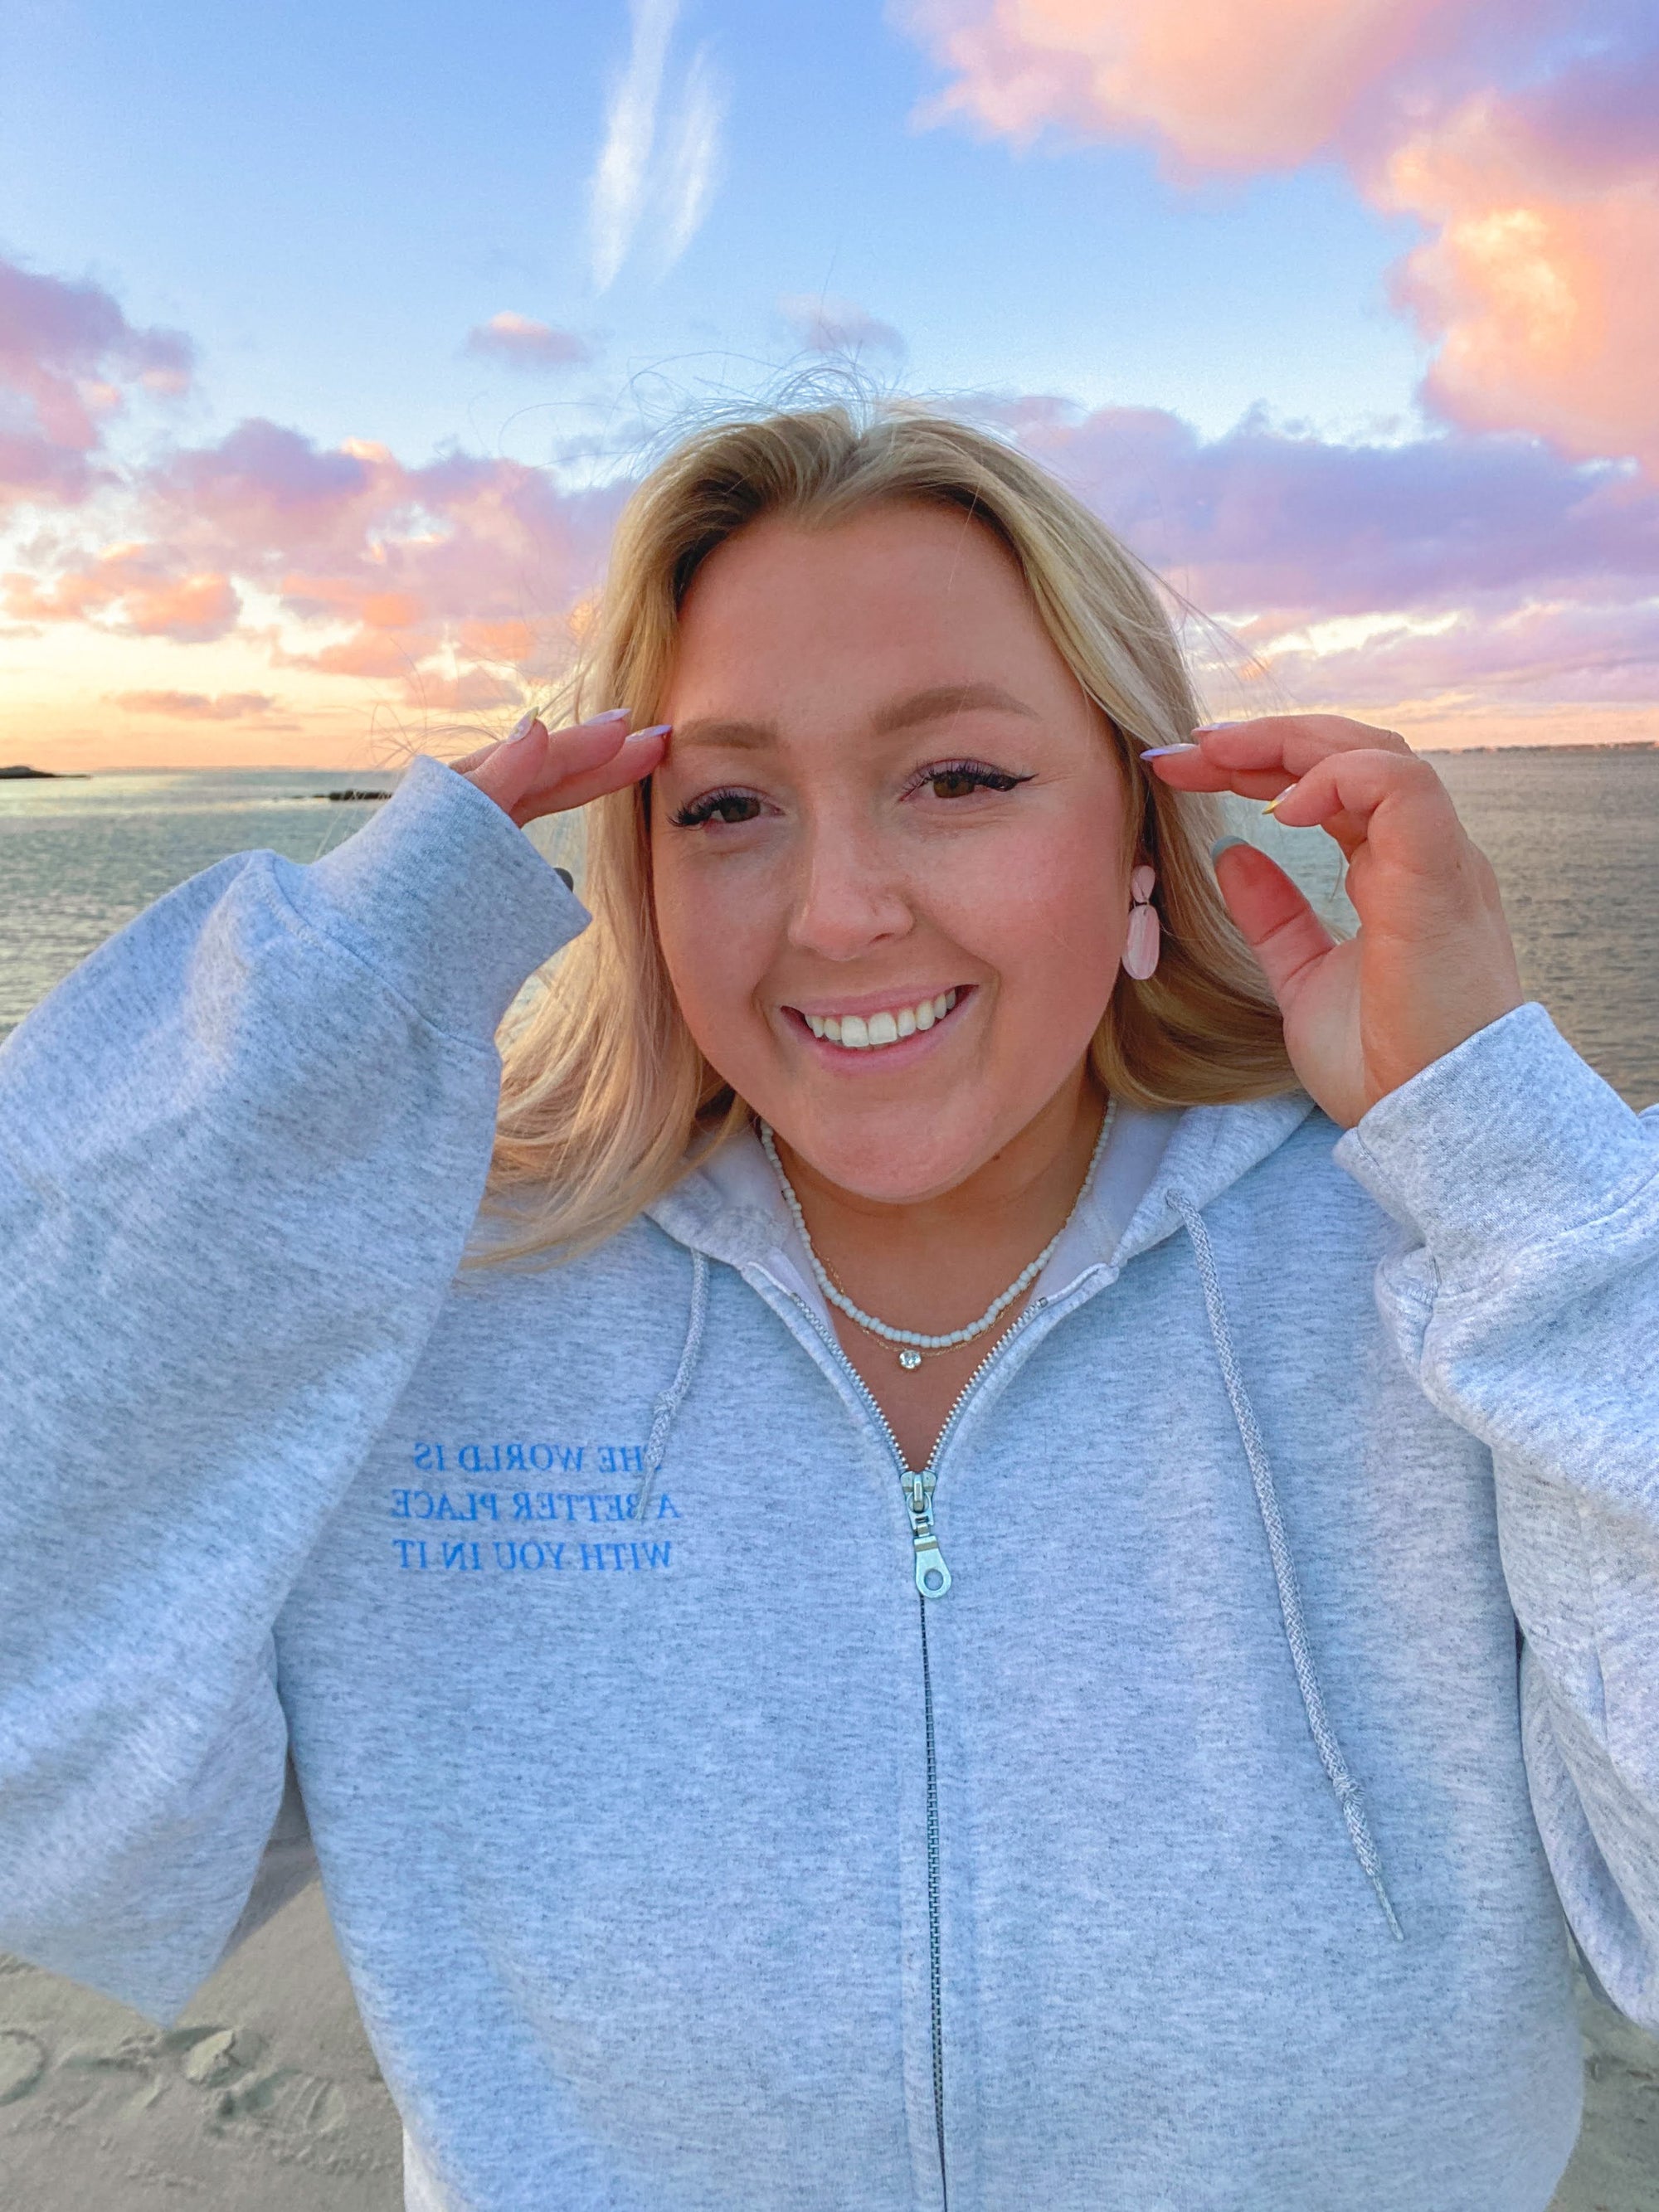 The World Is A Better Place With You In It Zip Up Hoodie